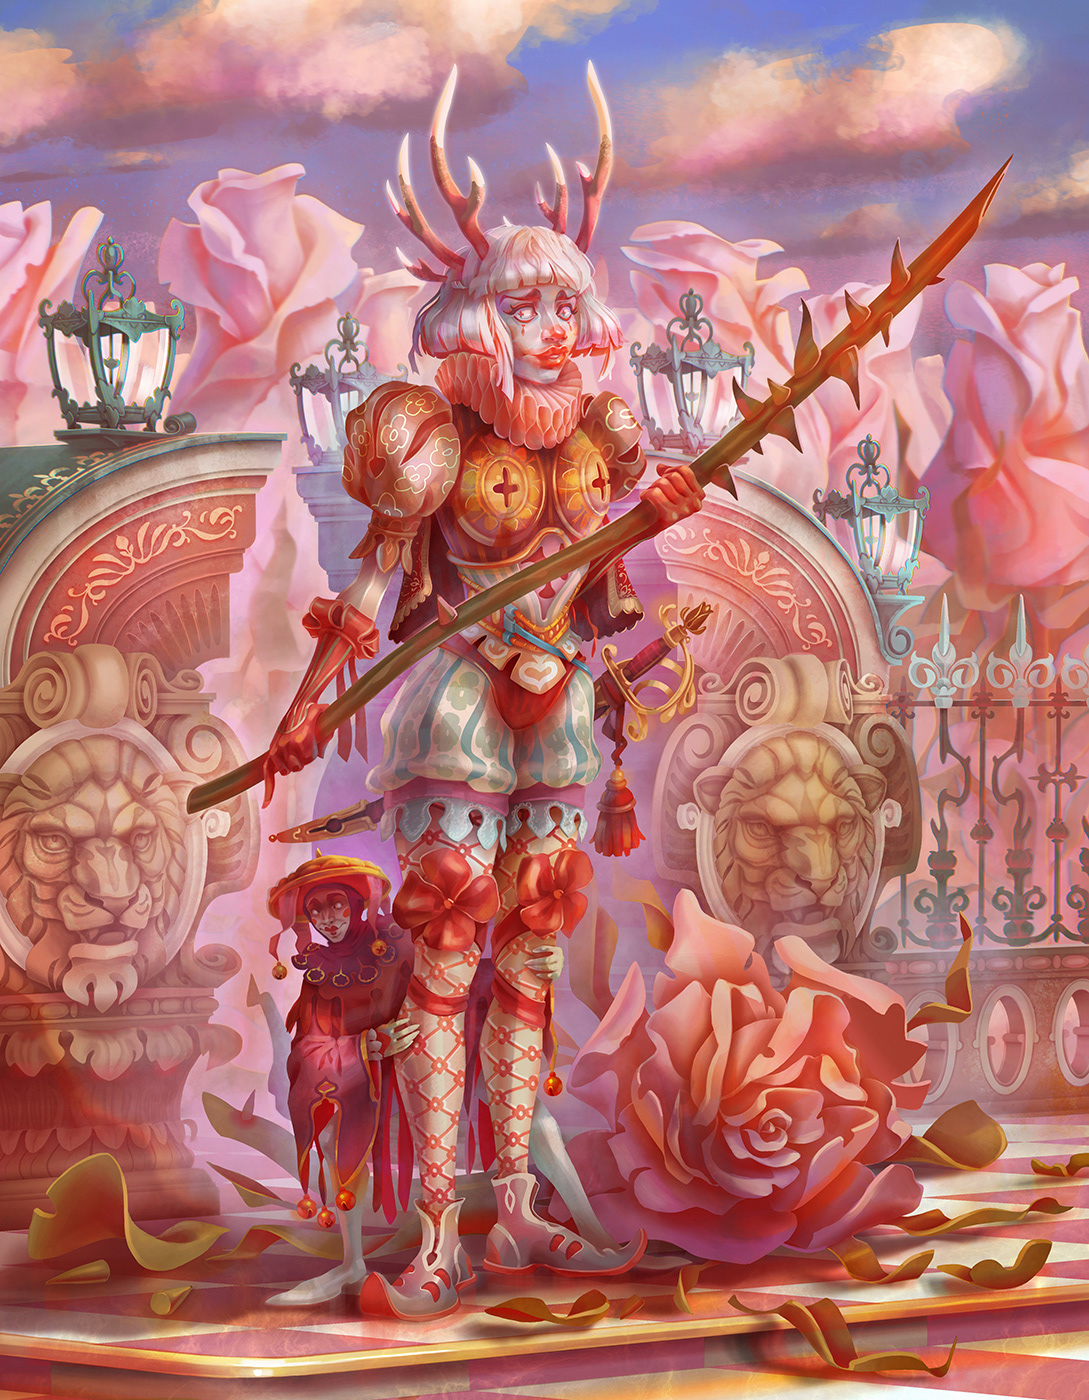 The guard of the rose garden on Behance